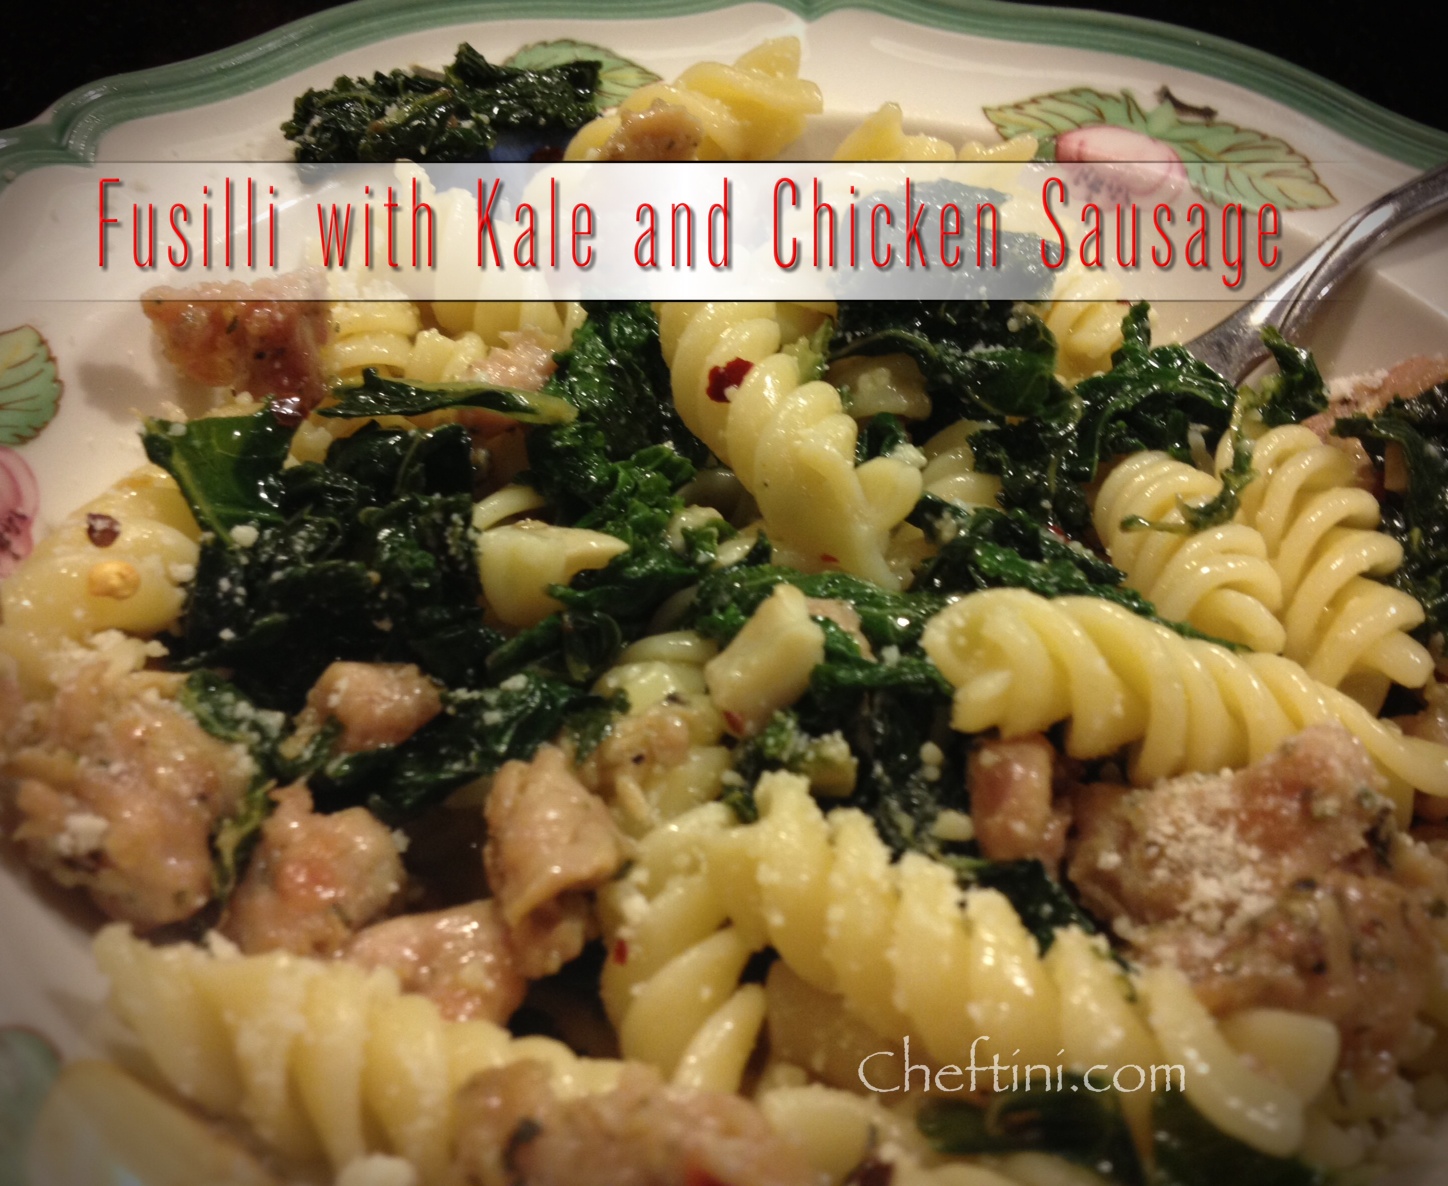 Fusilli with Kale and Chicken Sausage